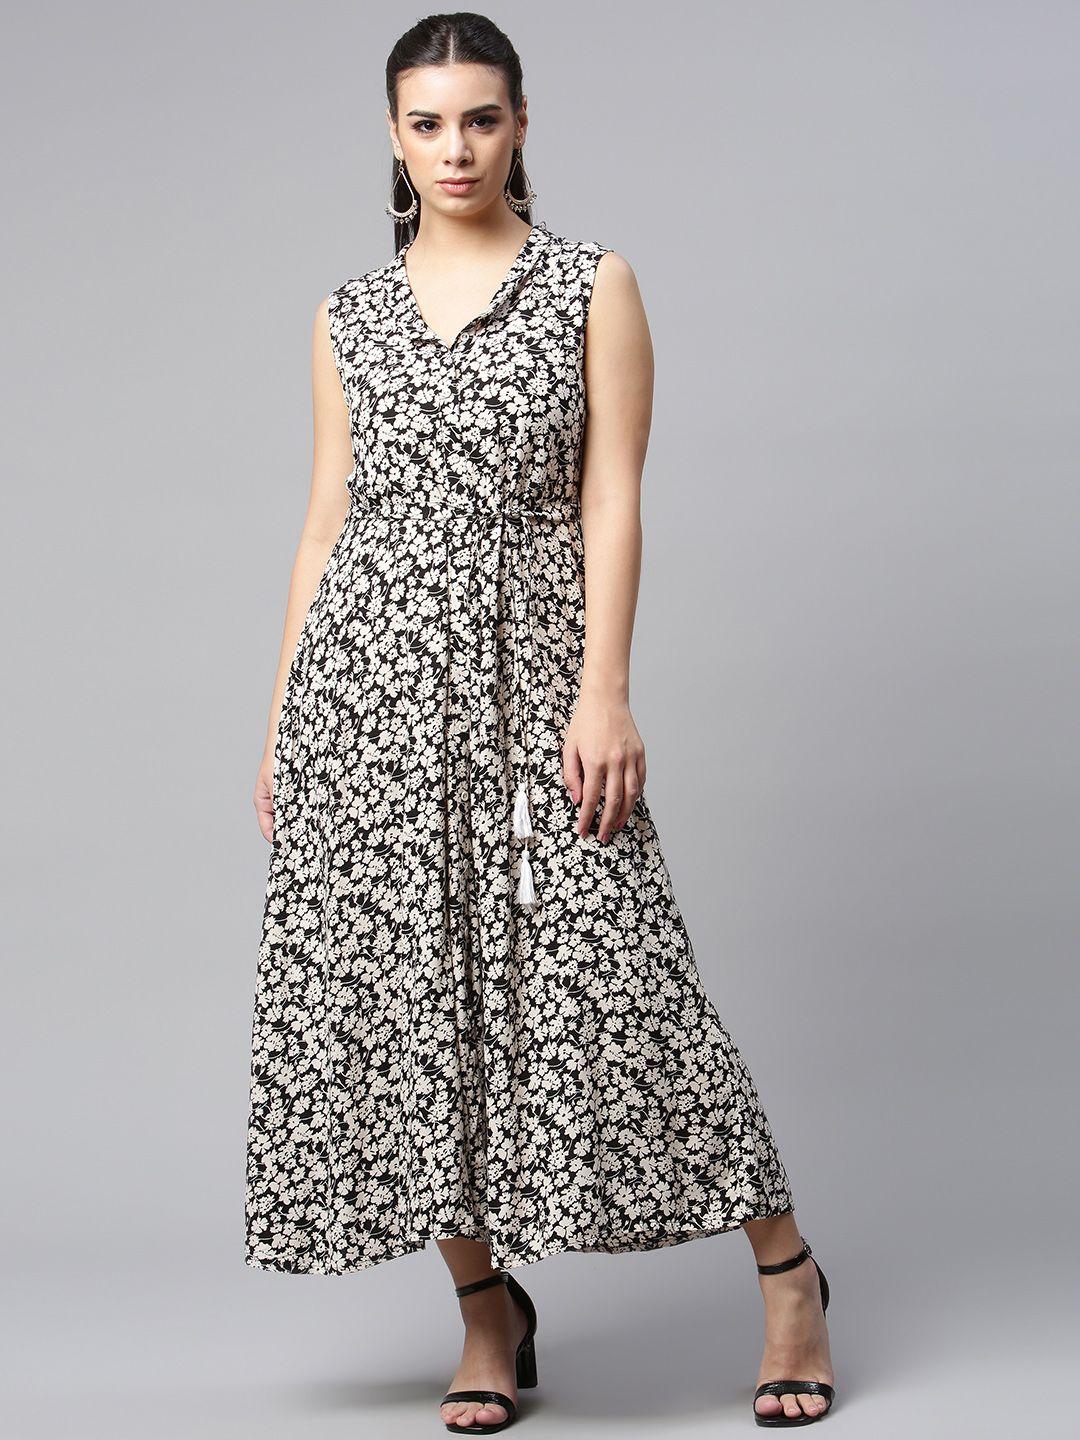 here&now women black printed fit & flared ethnic dresses